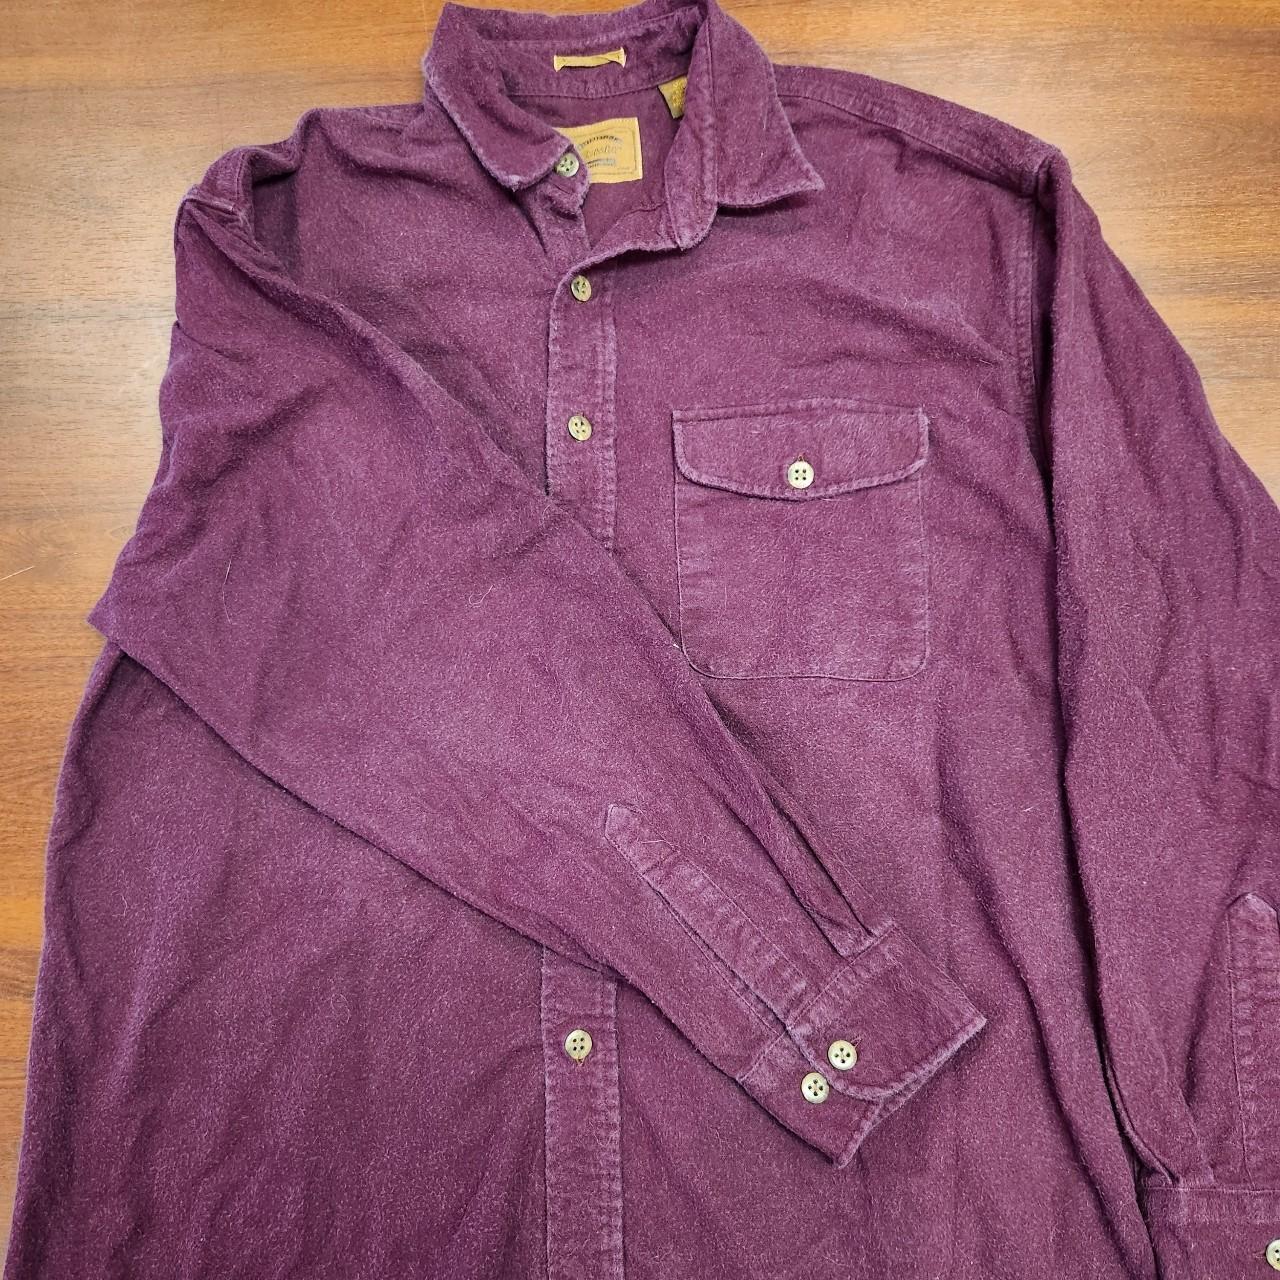 Wine colored st johns Bay button up. Super cute and... - Depop